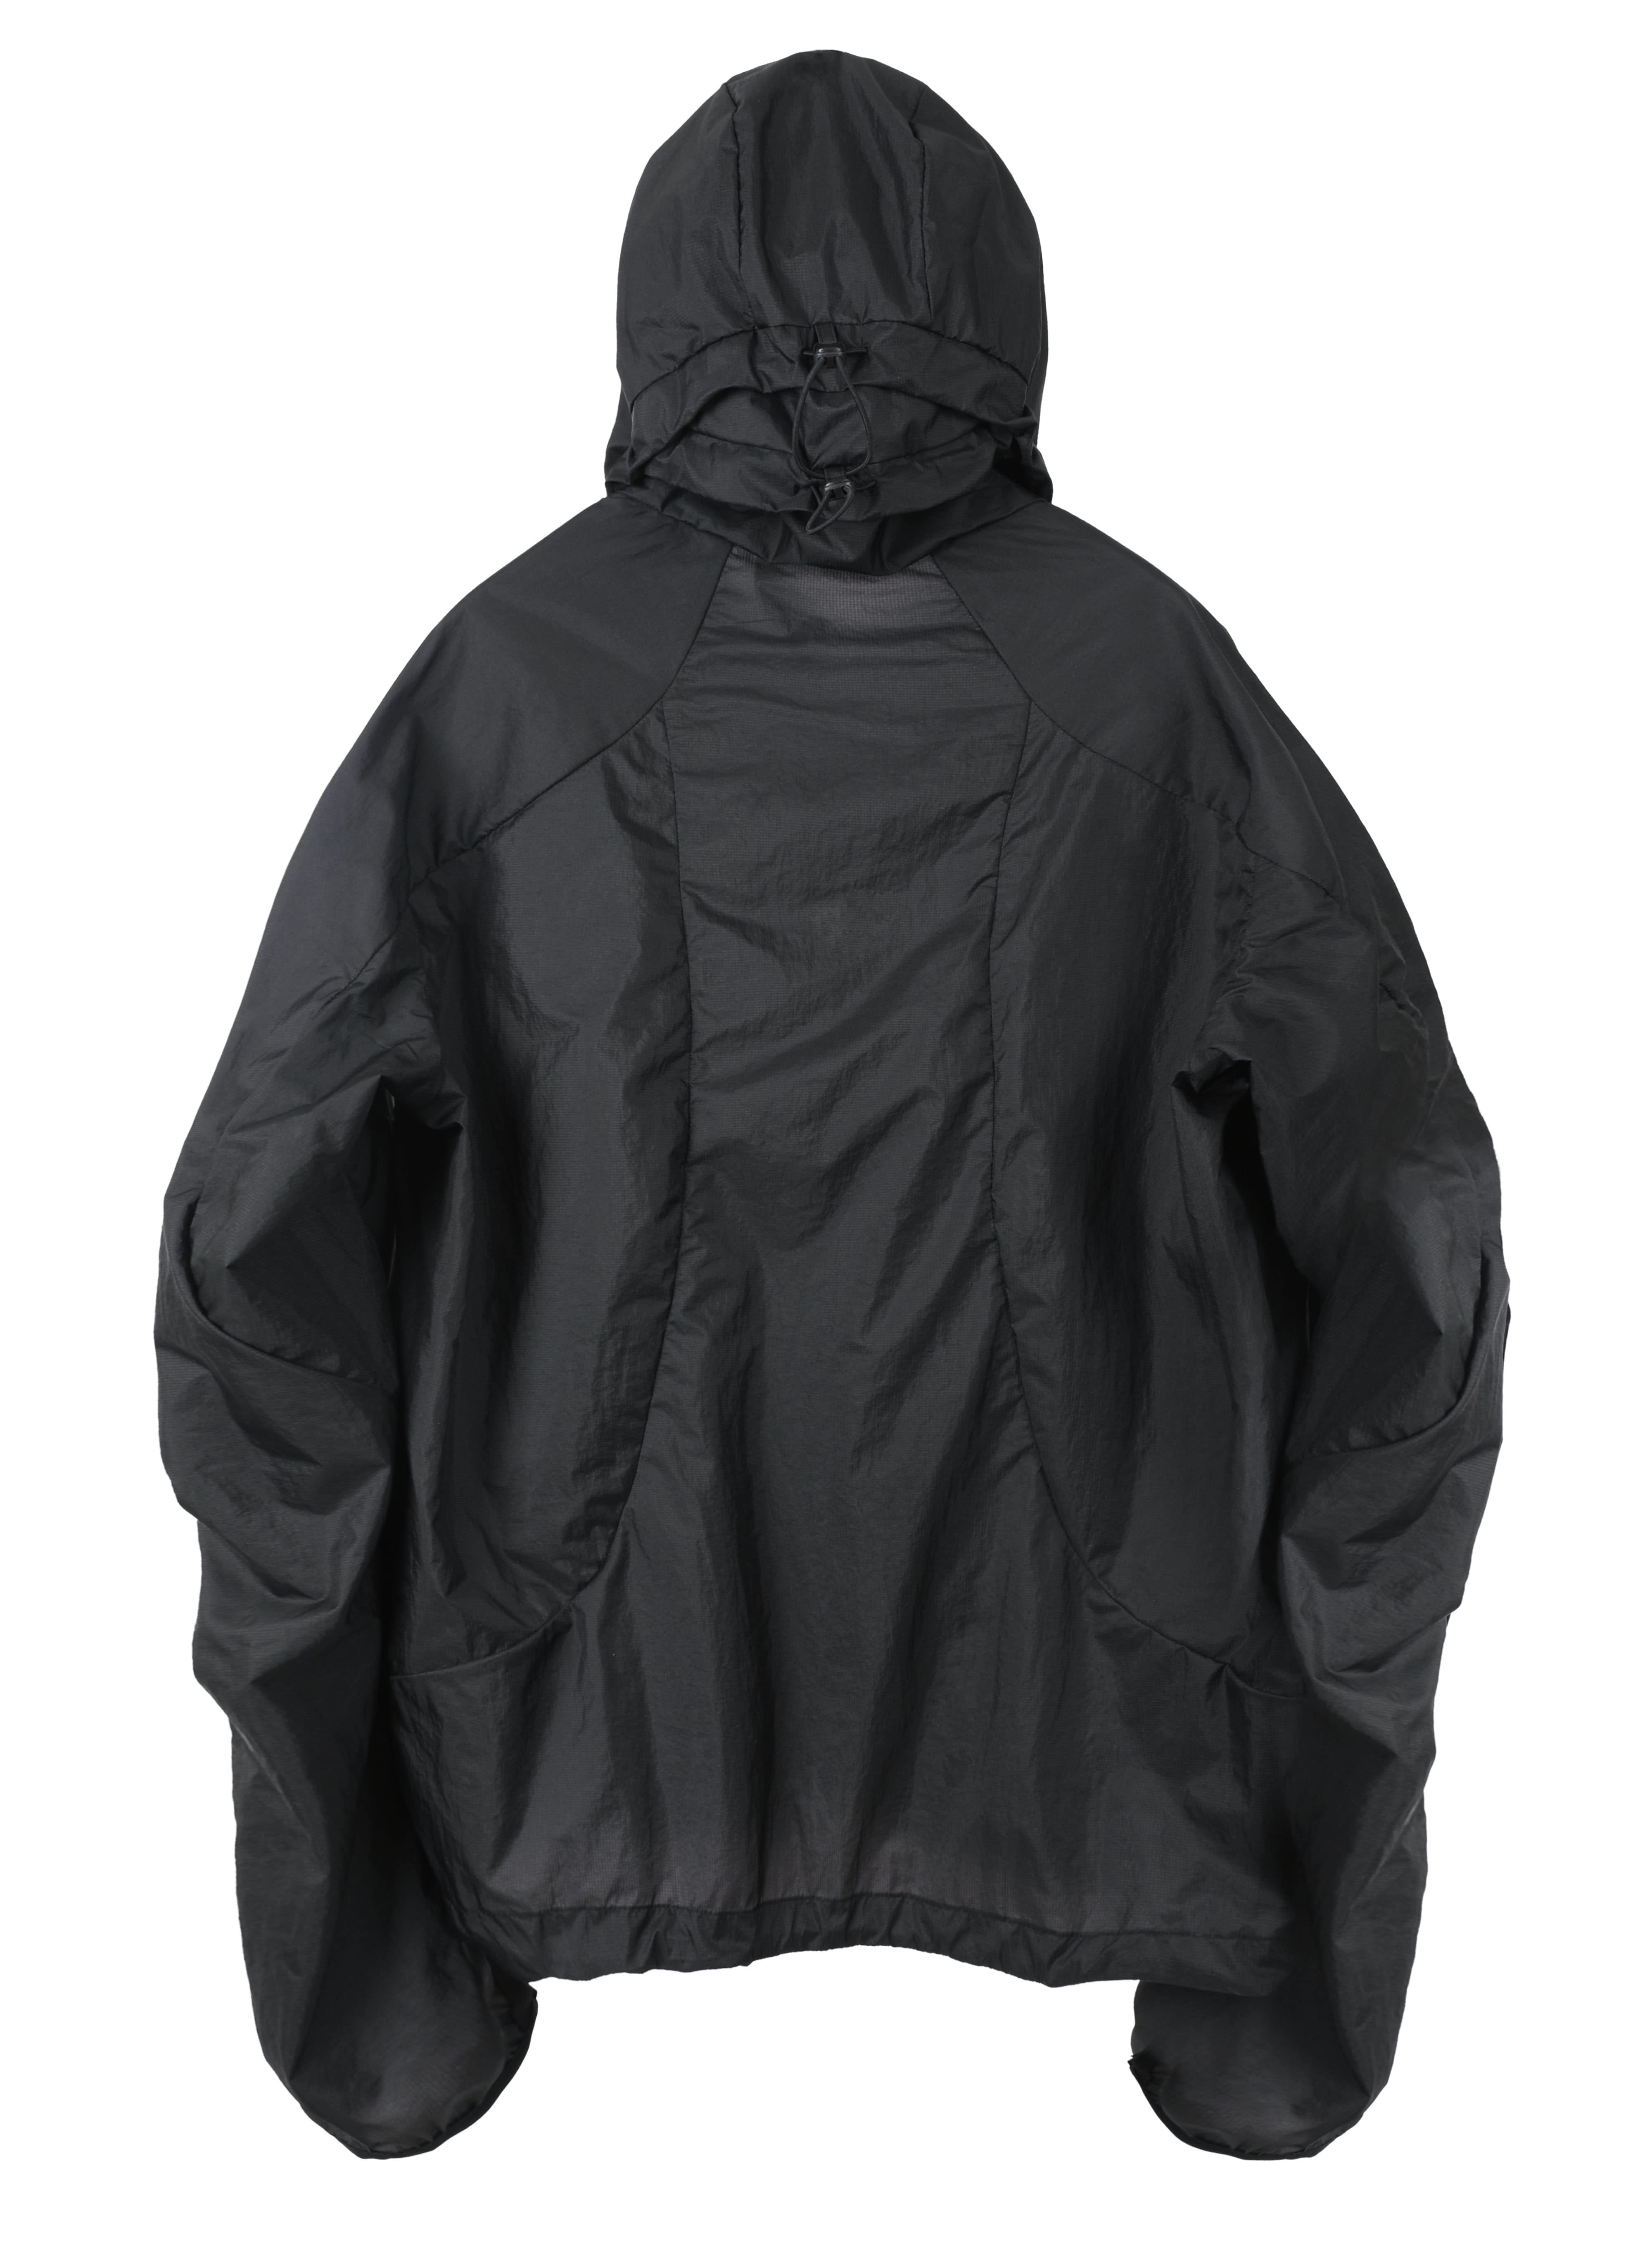 5.0 TECHNICAL JACKET RIGHT (BLACK)